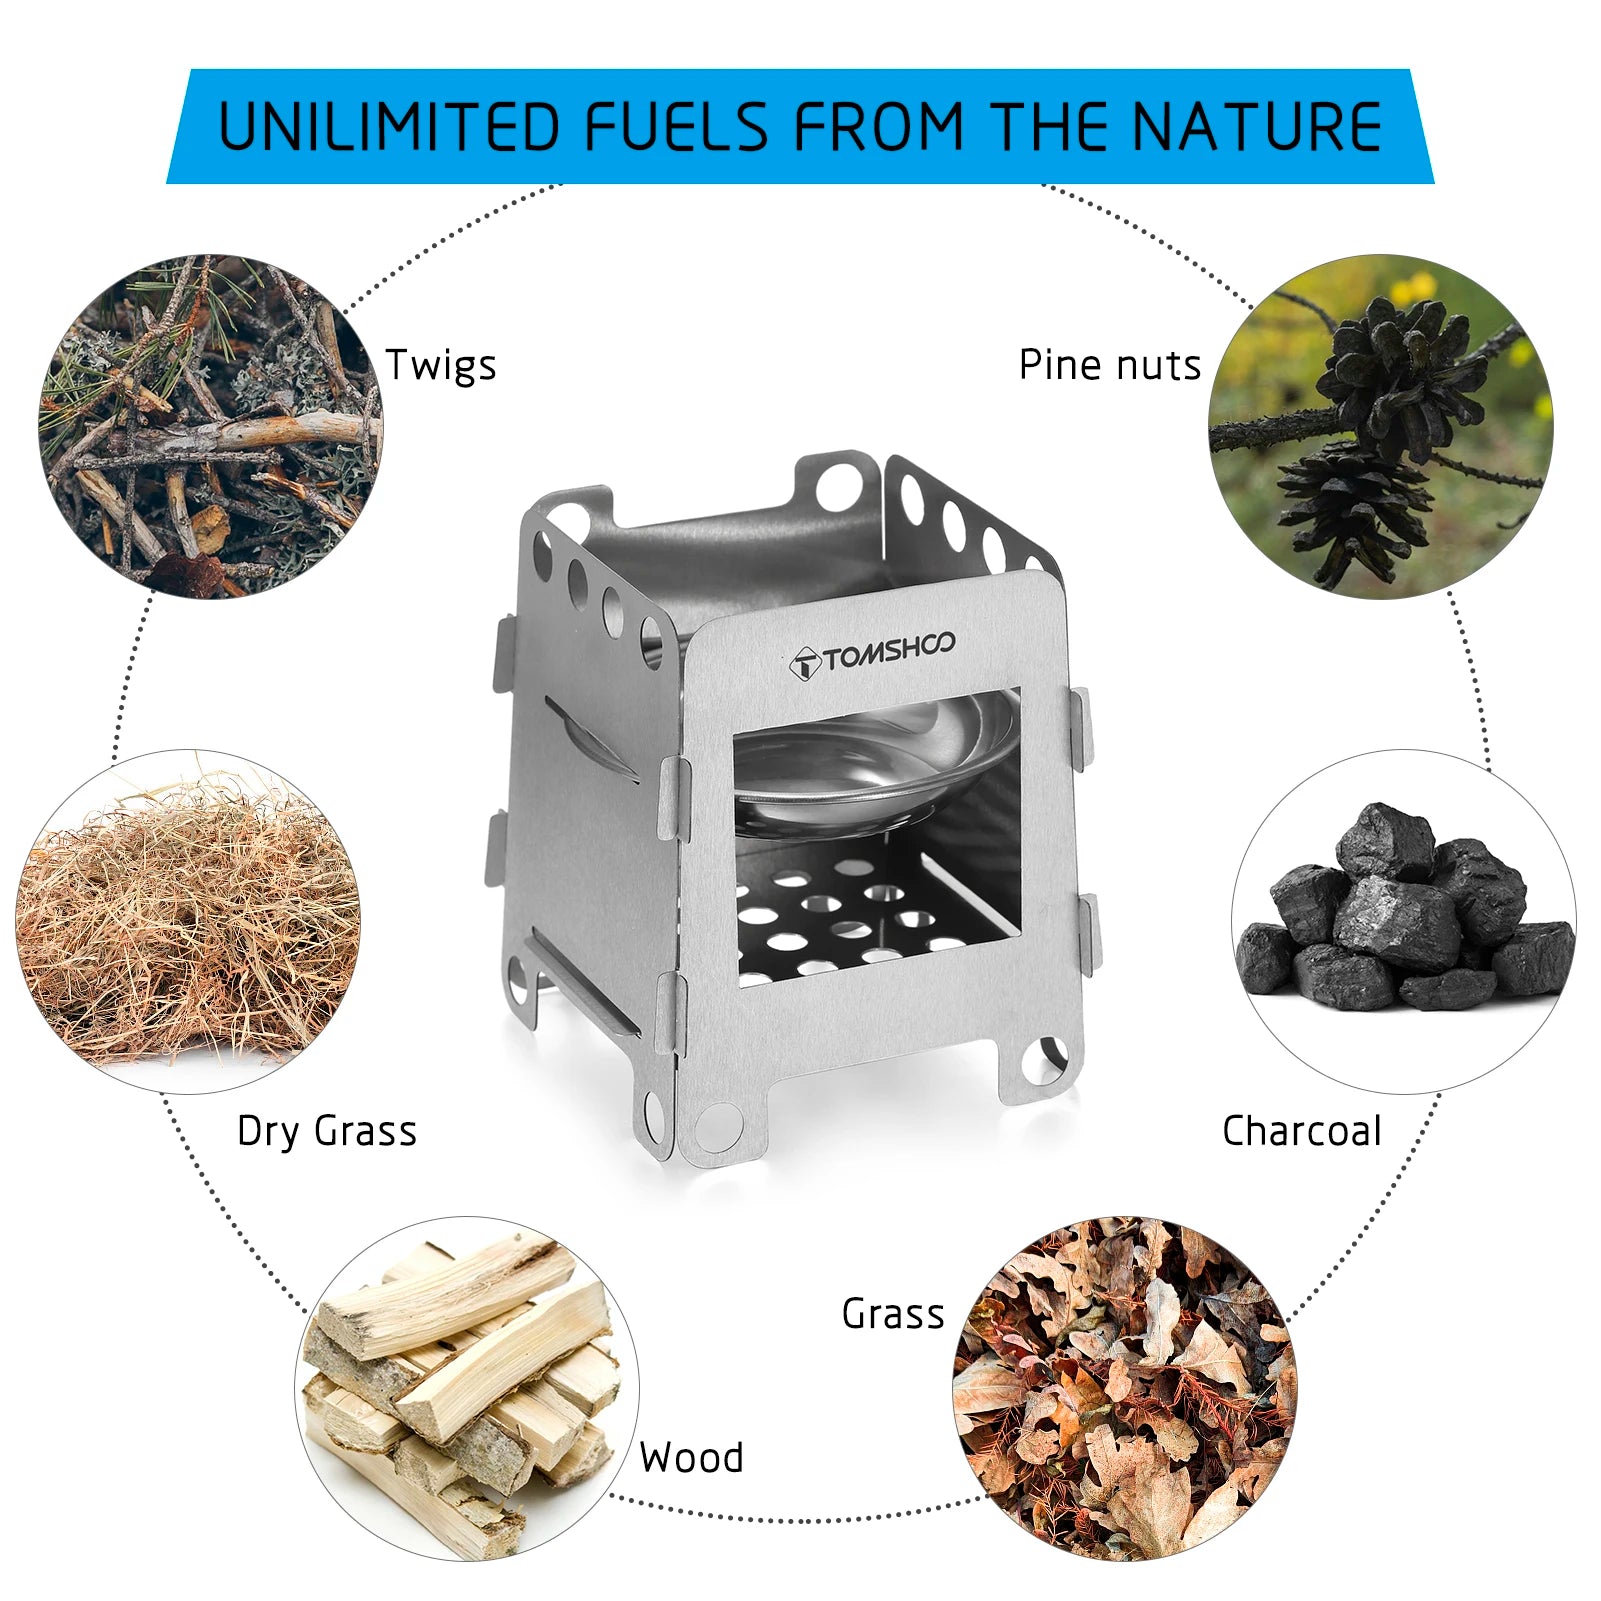 Outdoor Camping Wood Burning Stove with Barbecue Grill - Lightweight, Folding and Portable